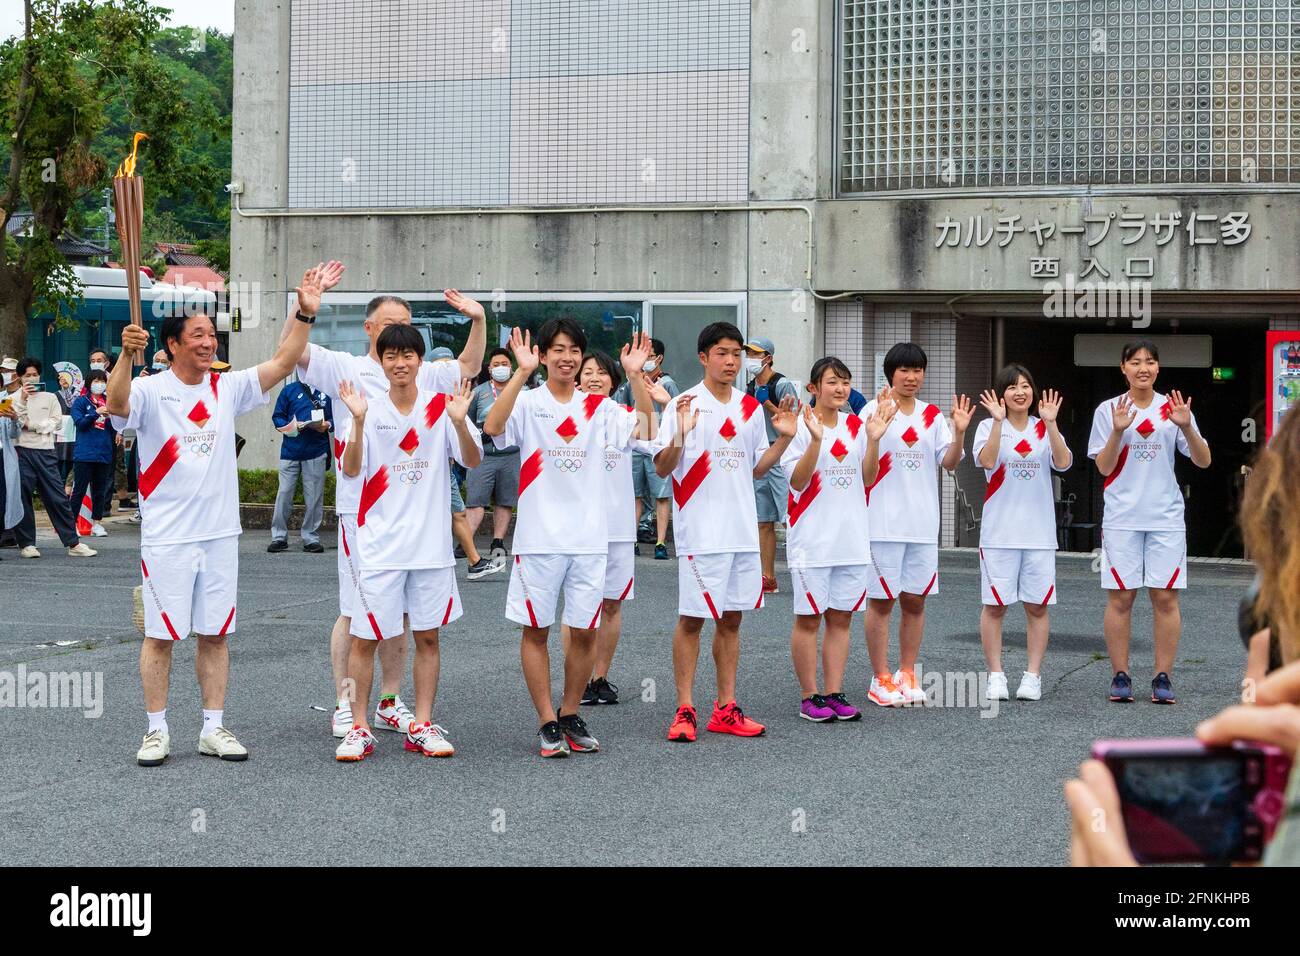 Local torchbearers pose during the Tokyo 2020 Olympic torch relay in Okuizumo Town, Shimane Prefecture, Japan on May 16, 2021. Credit: Ryoji Okamoto/AFLO/Alamy Live News Stock Photo